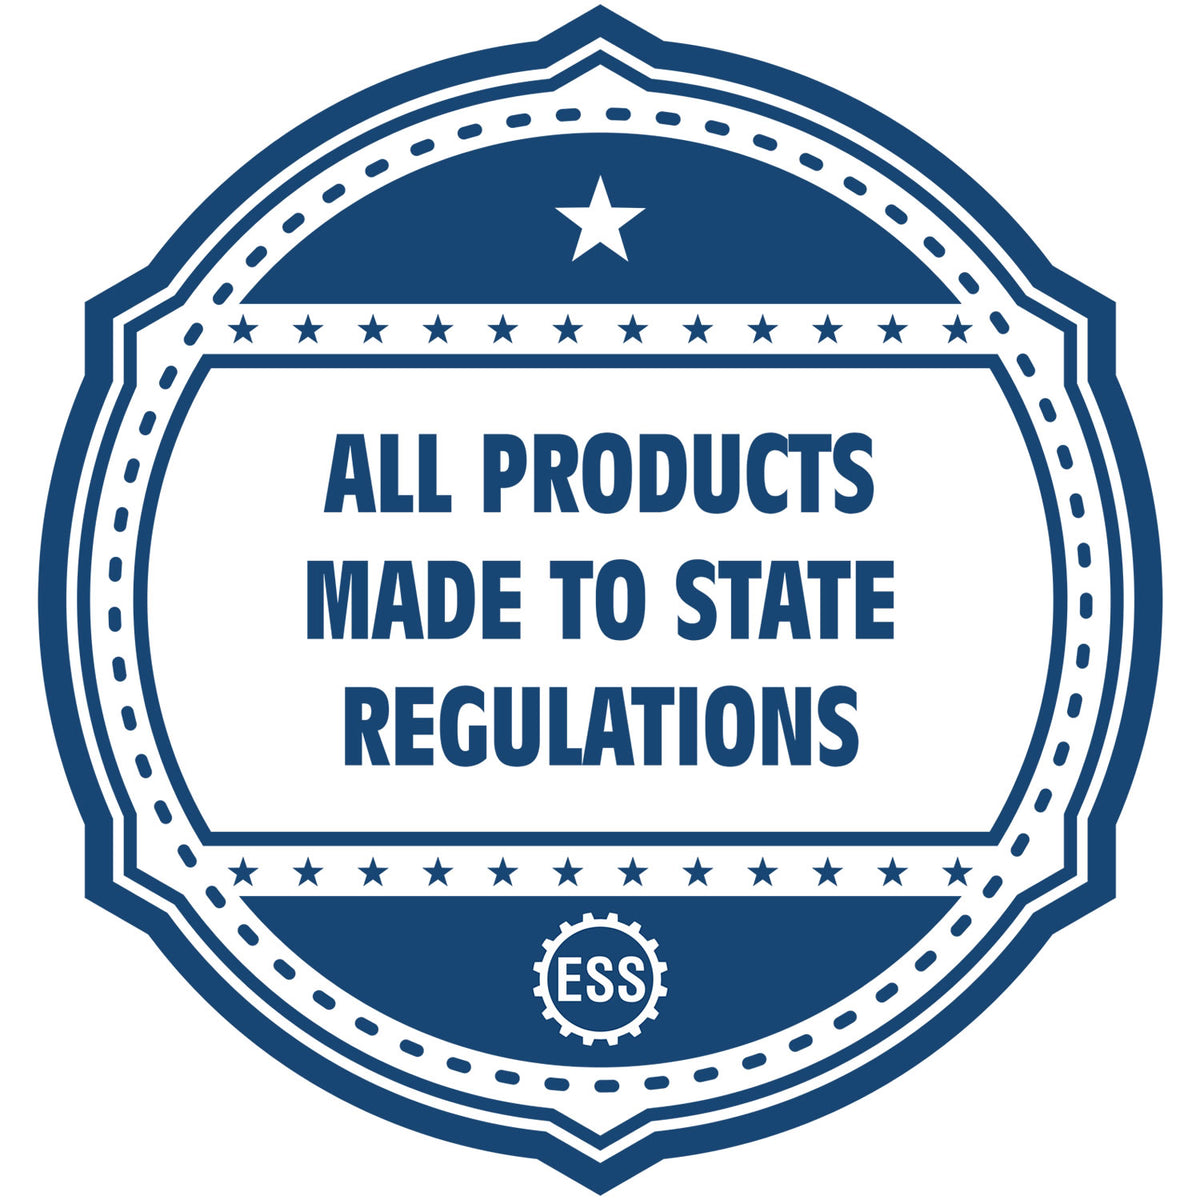 An icon or badge element for the Self-Inking Hawaii PE Stamp showing that this product is made in compliance with state regulations.